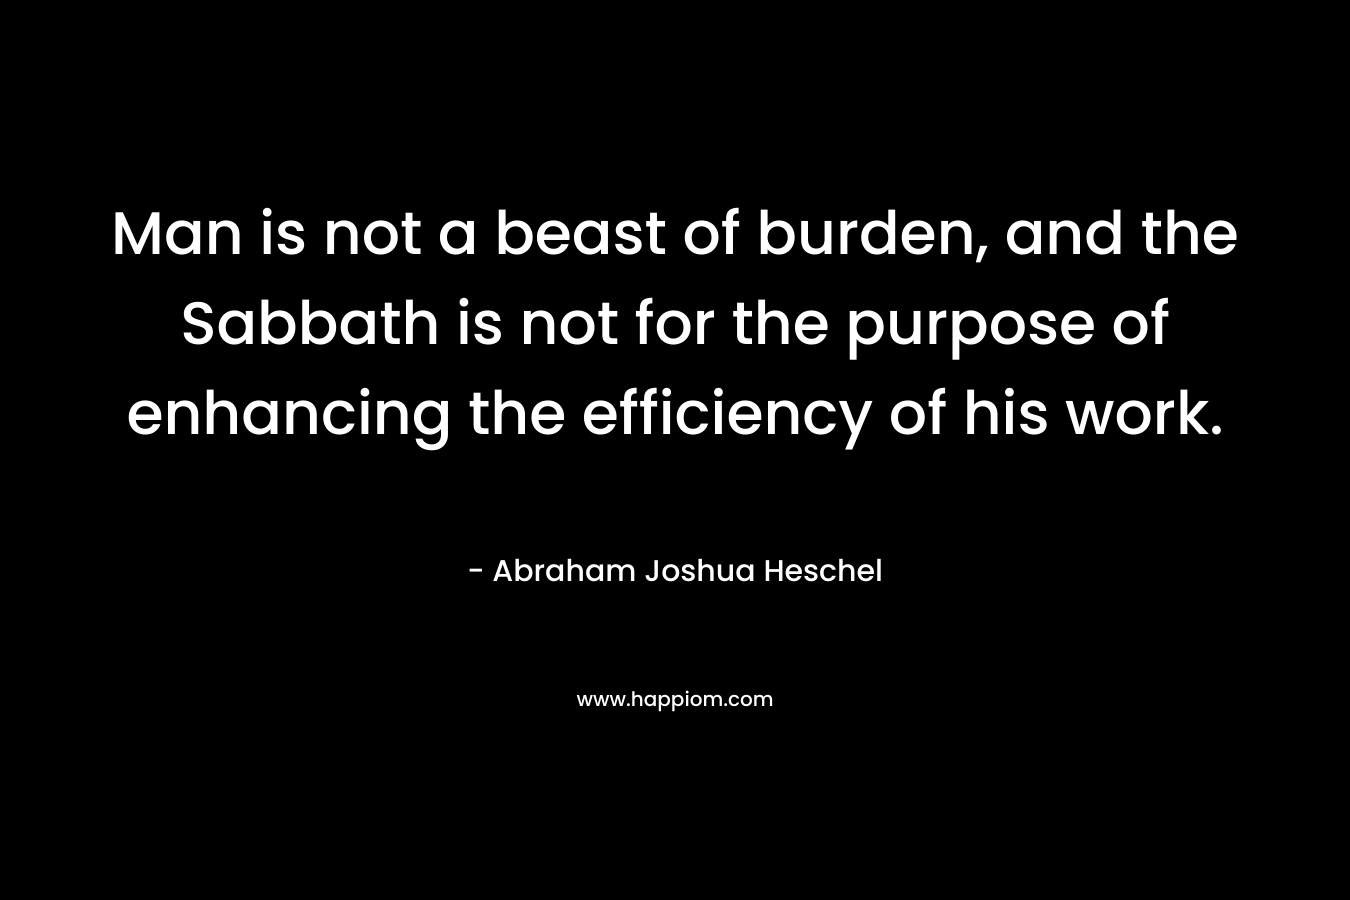 Man is not a beast of burden, and the Sabbath is not for the purpose of enhancing the efficiency of his work. – Abraham Joshua Heschel